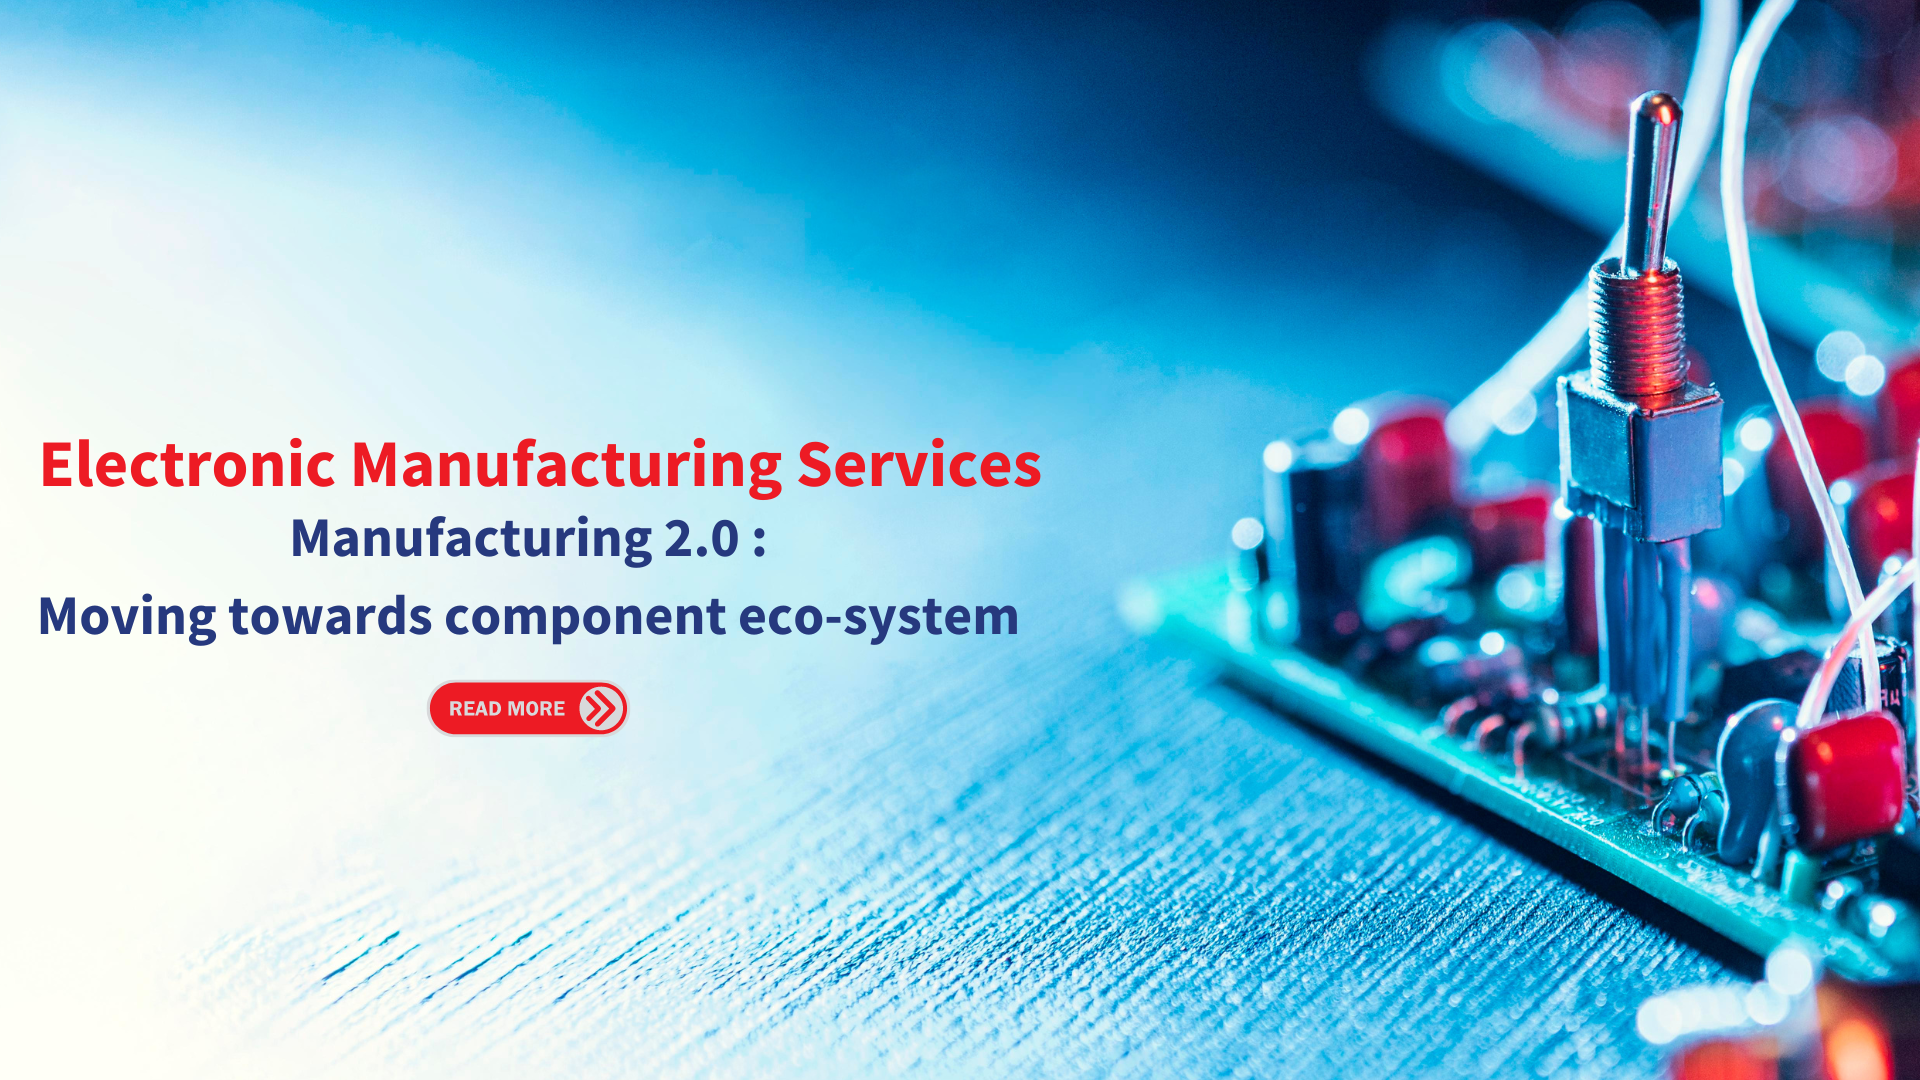 ELECTRONIC MANUFACTURING SERVICES